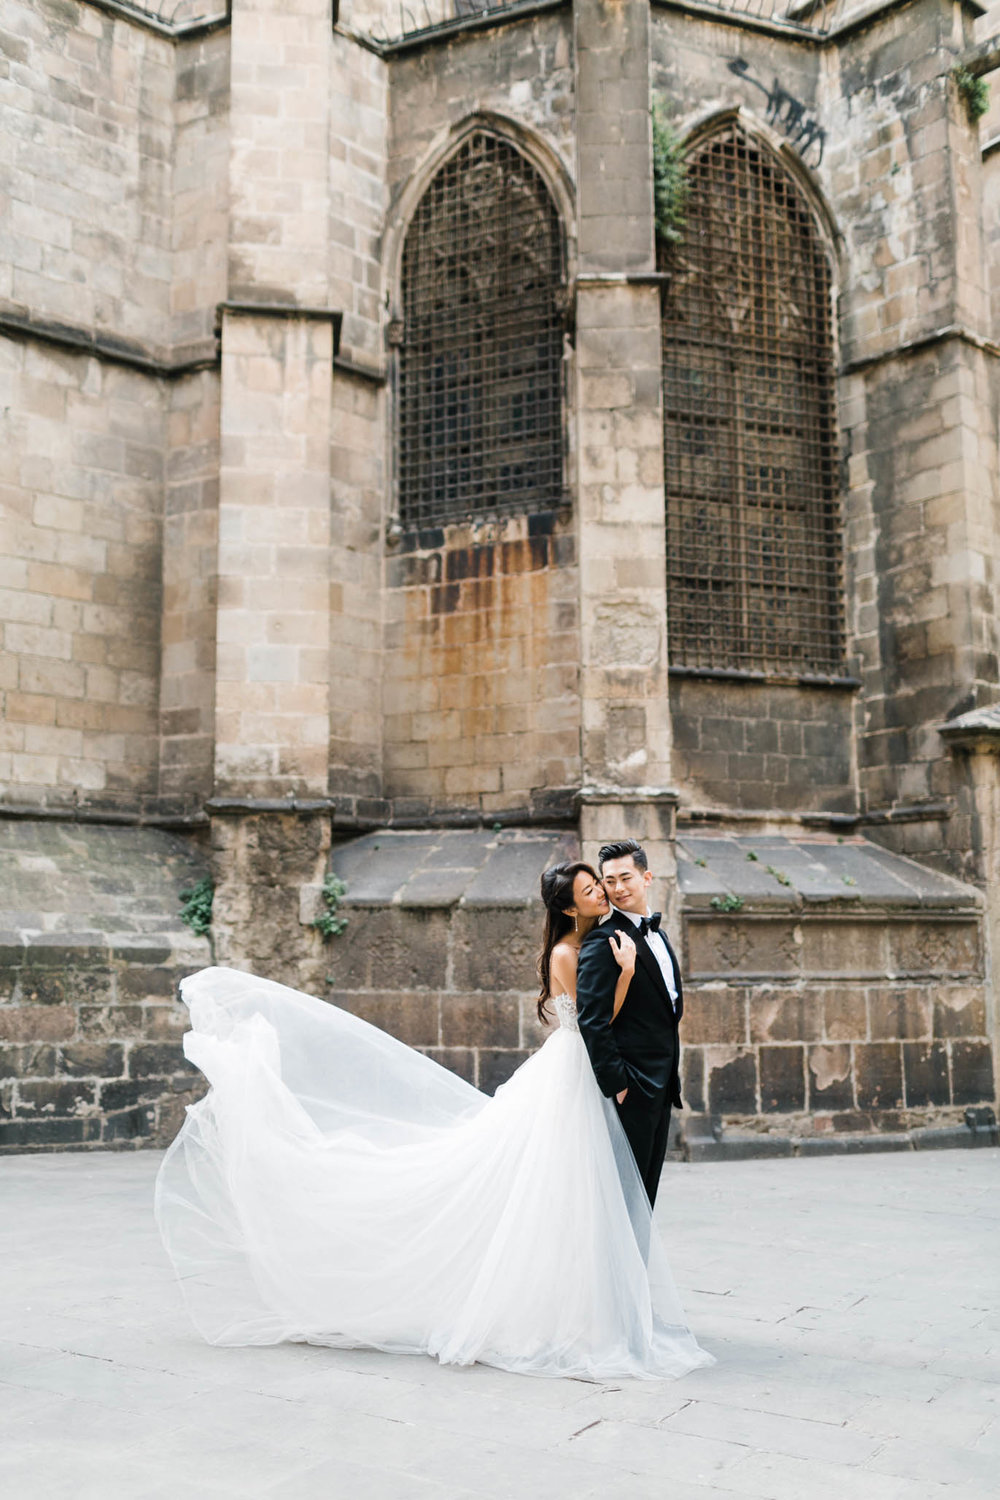 This will forever be imprinted in my dreams. Such a gorgeous shot in front of the Gothic Cathedral in Barcelona.